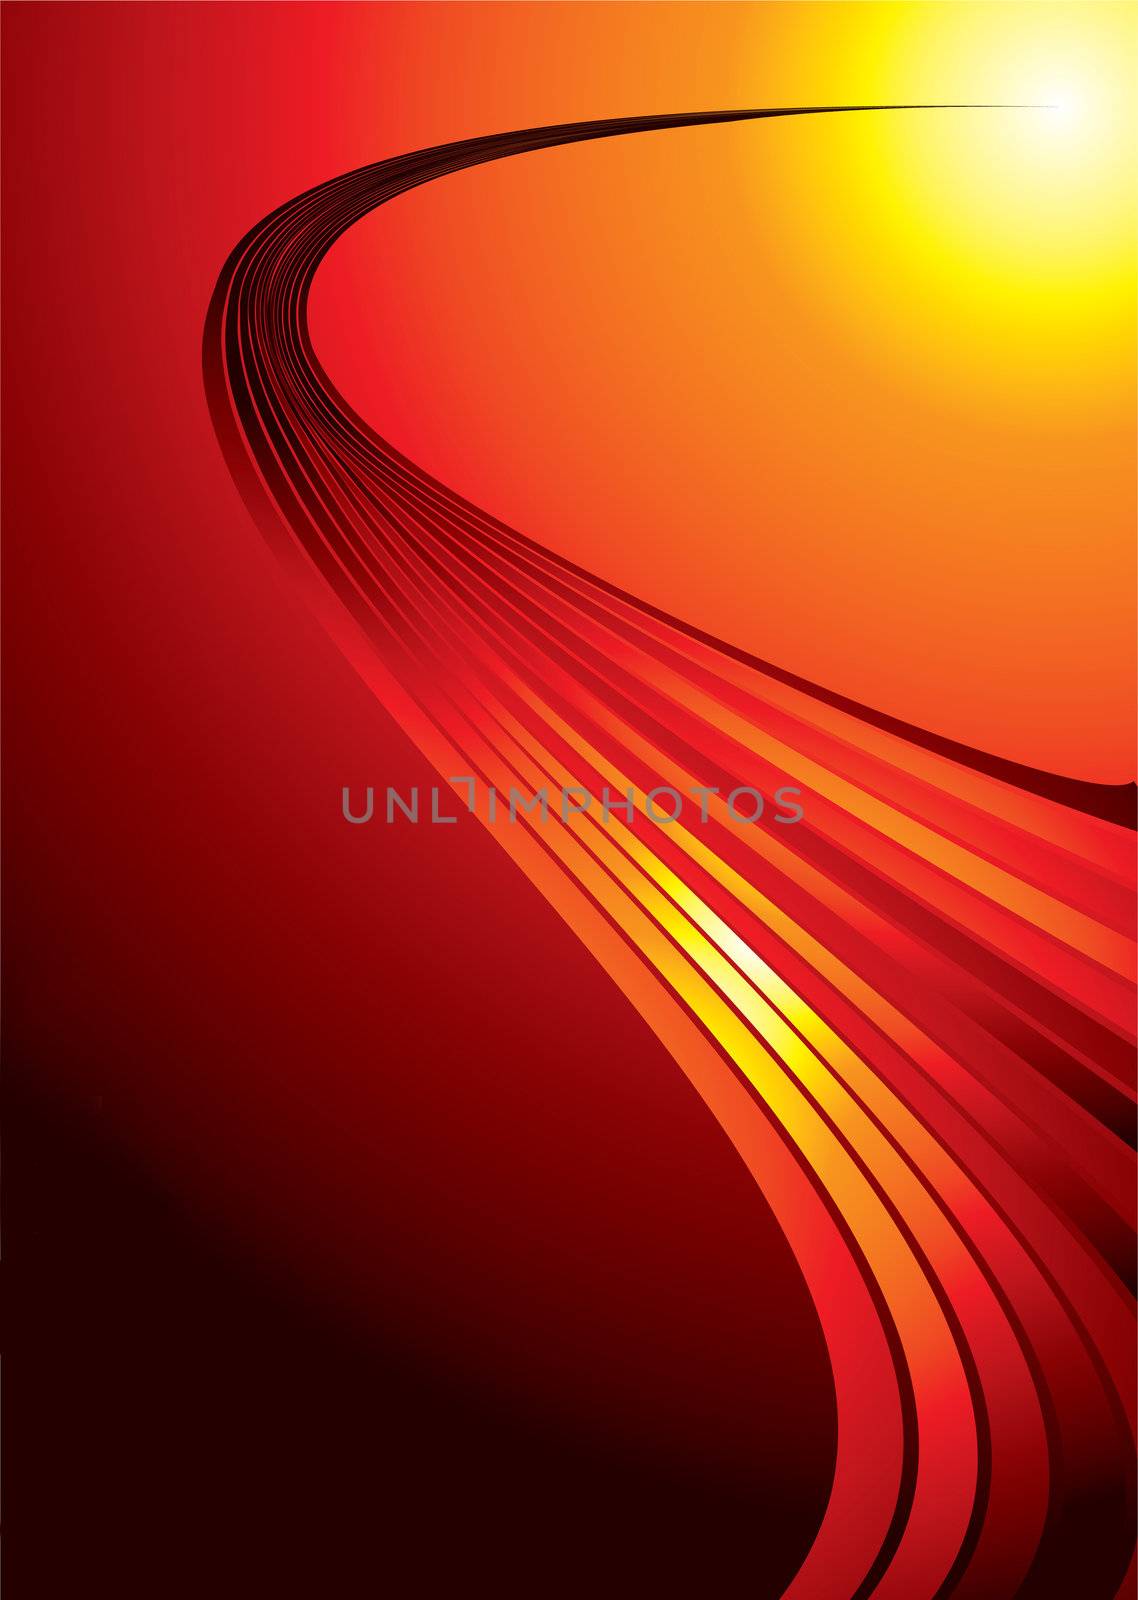 Red hot background with a flowing strand of light